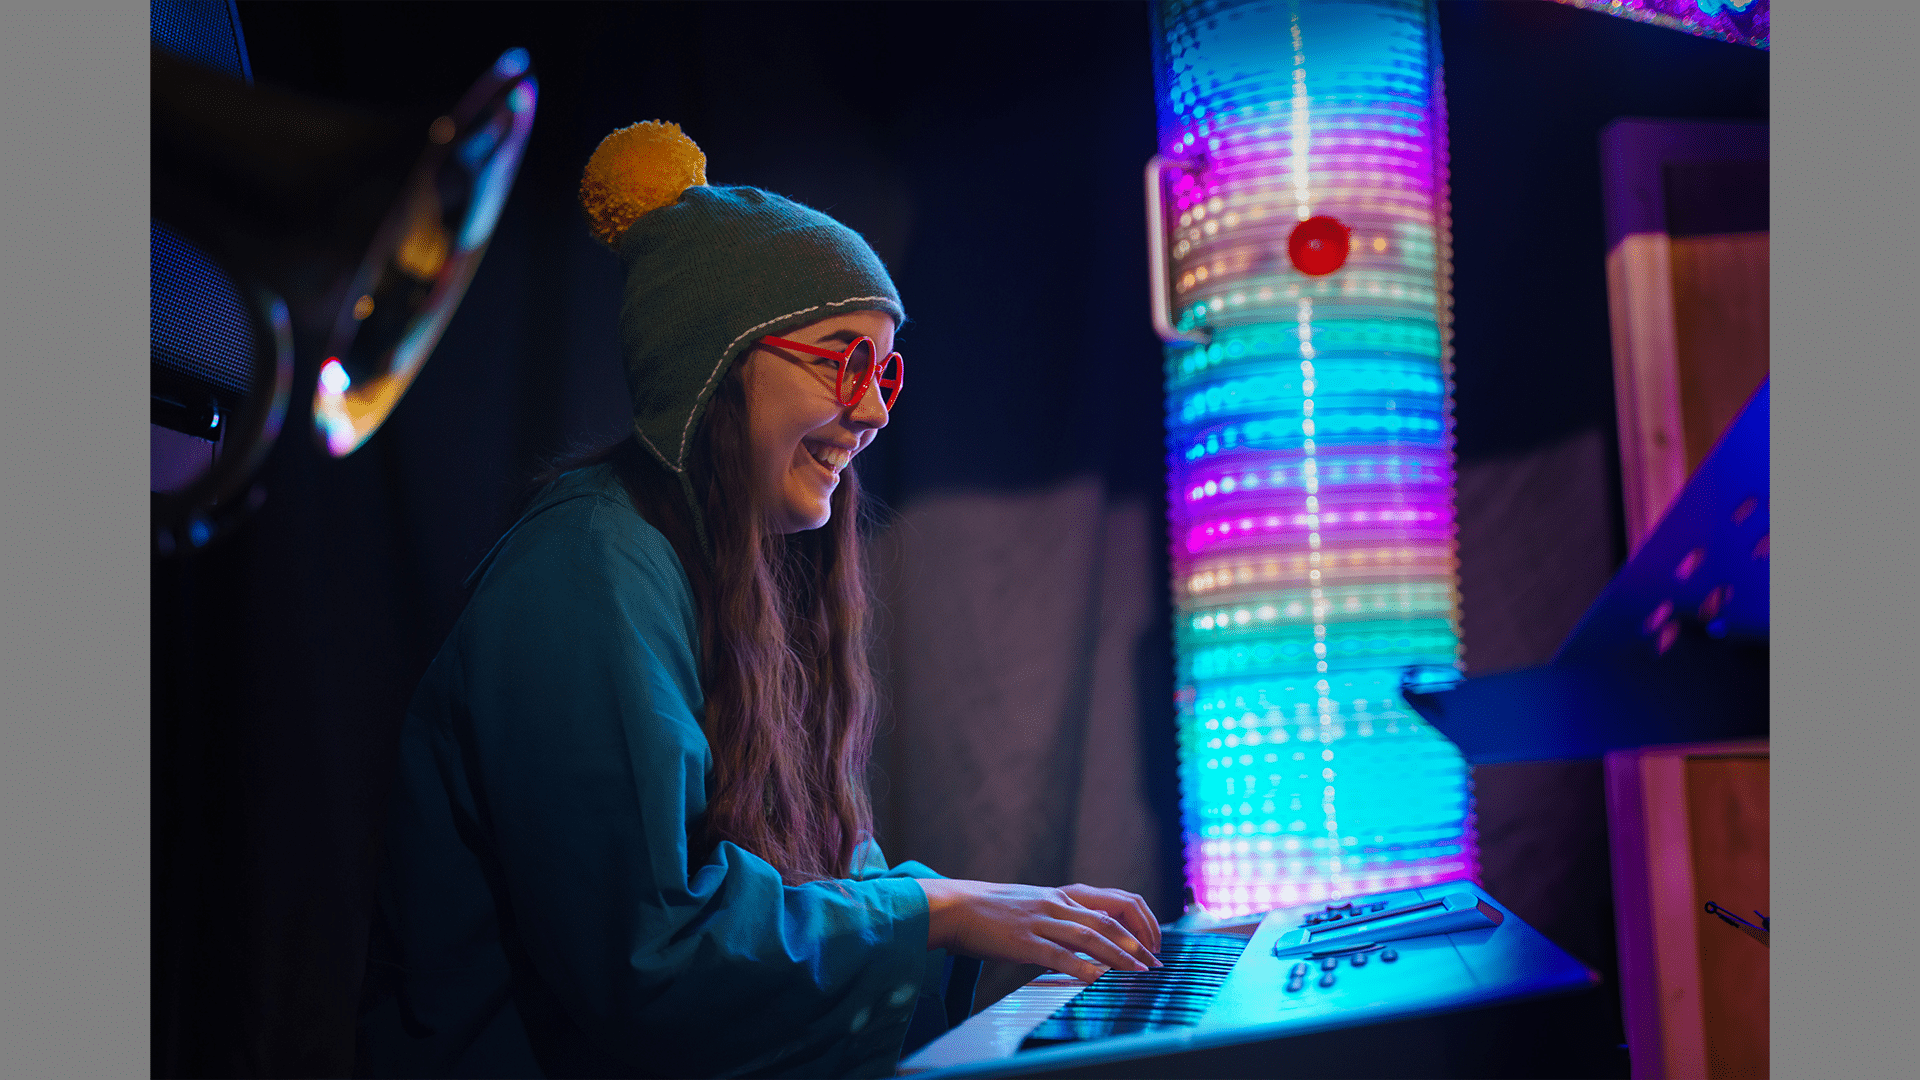 A woman plays keyboard, she has red glasses on, and a green bobble hat with a yellow bobble.